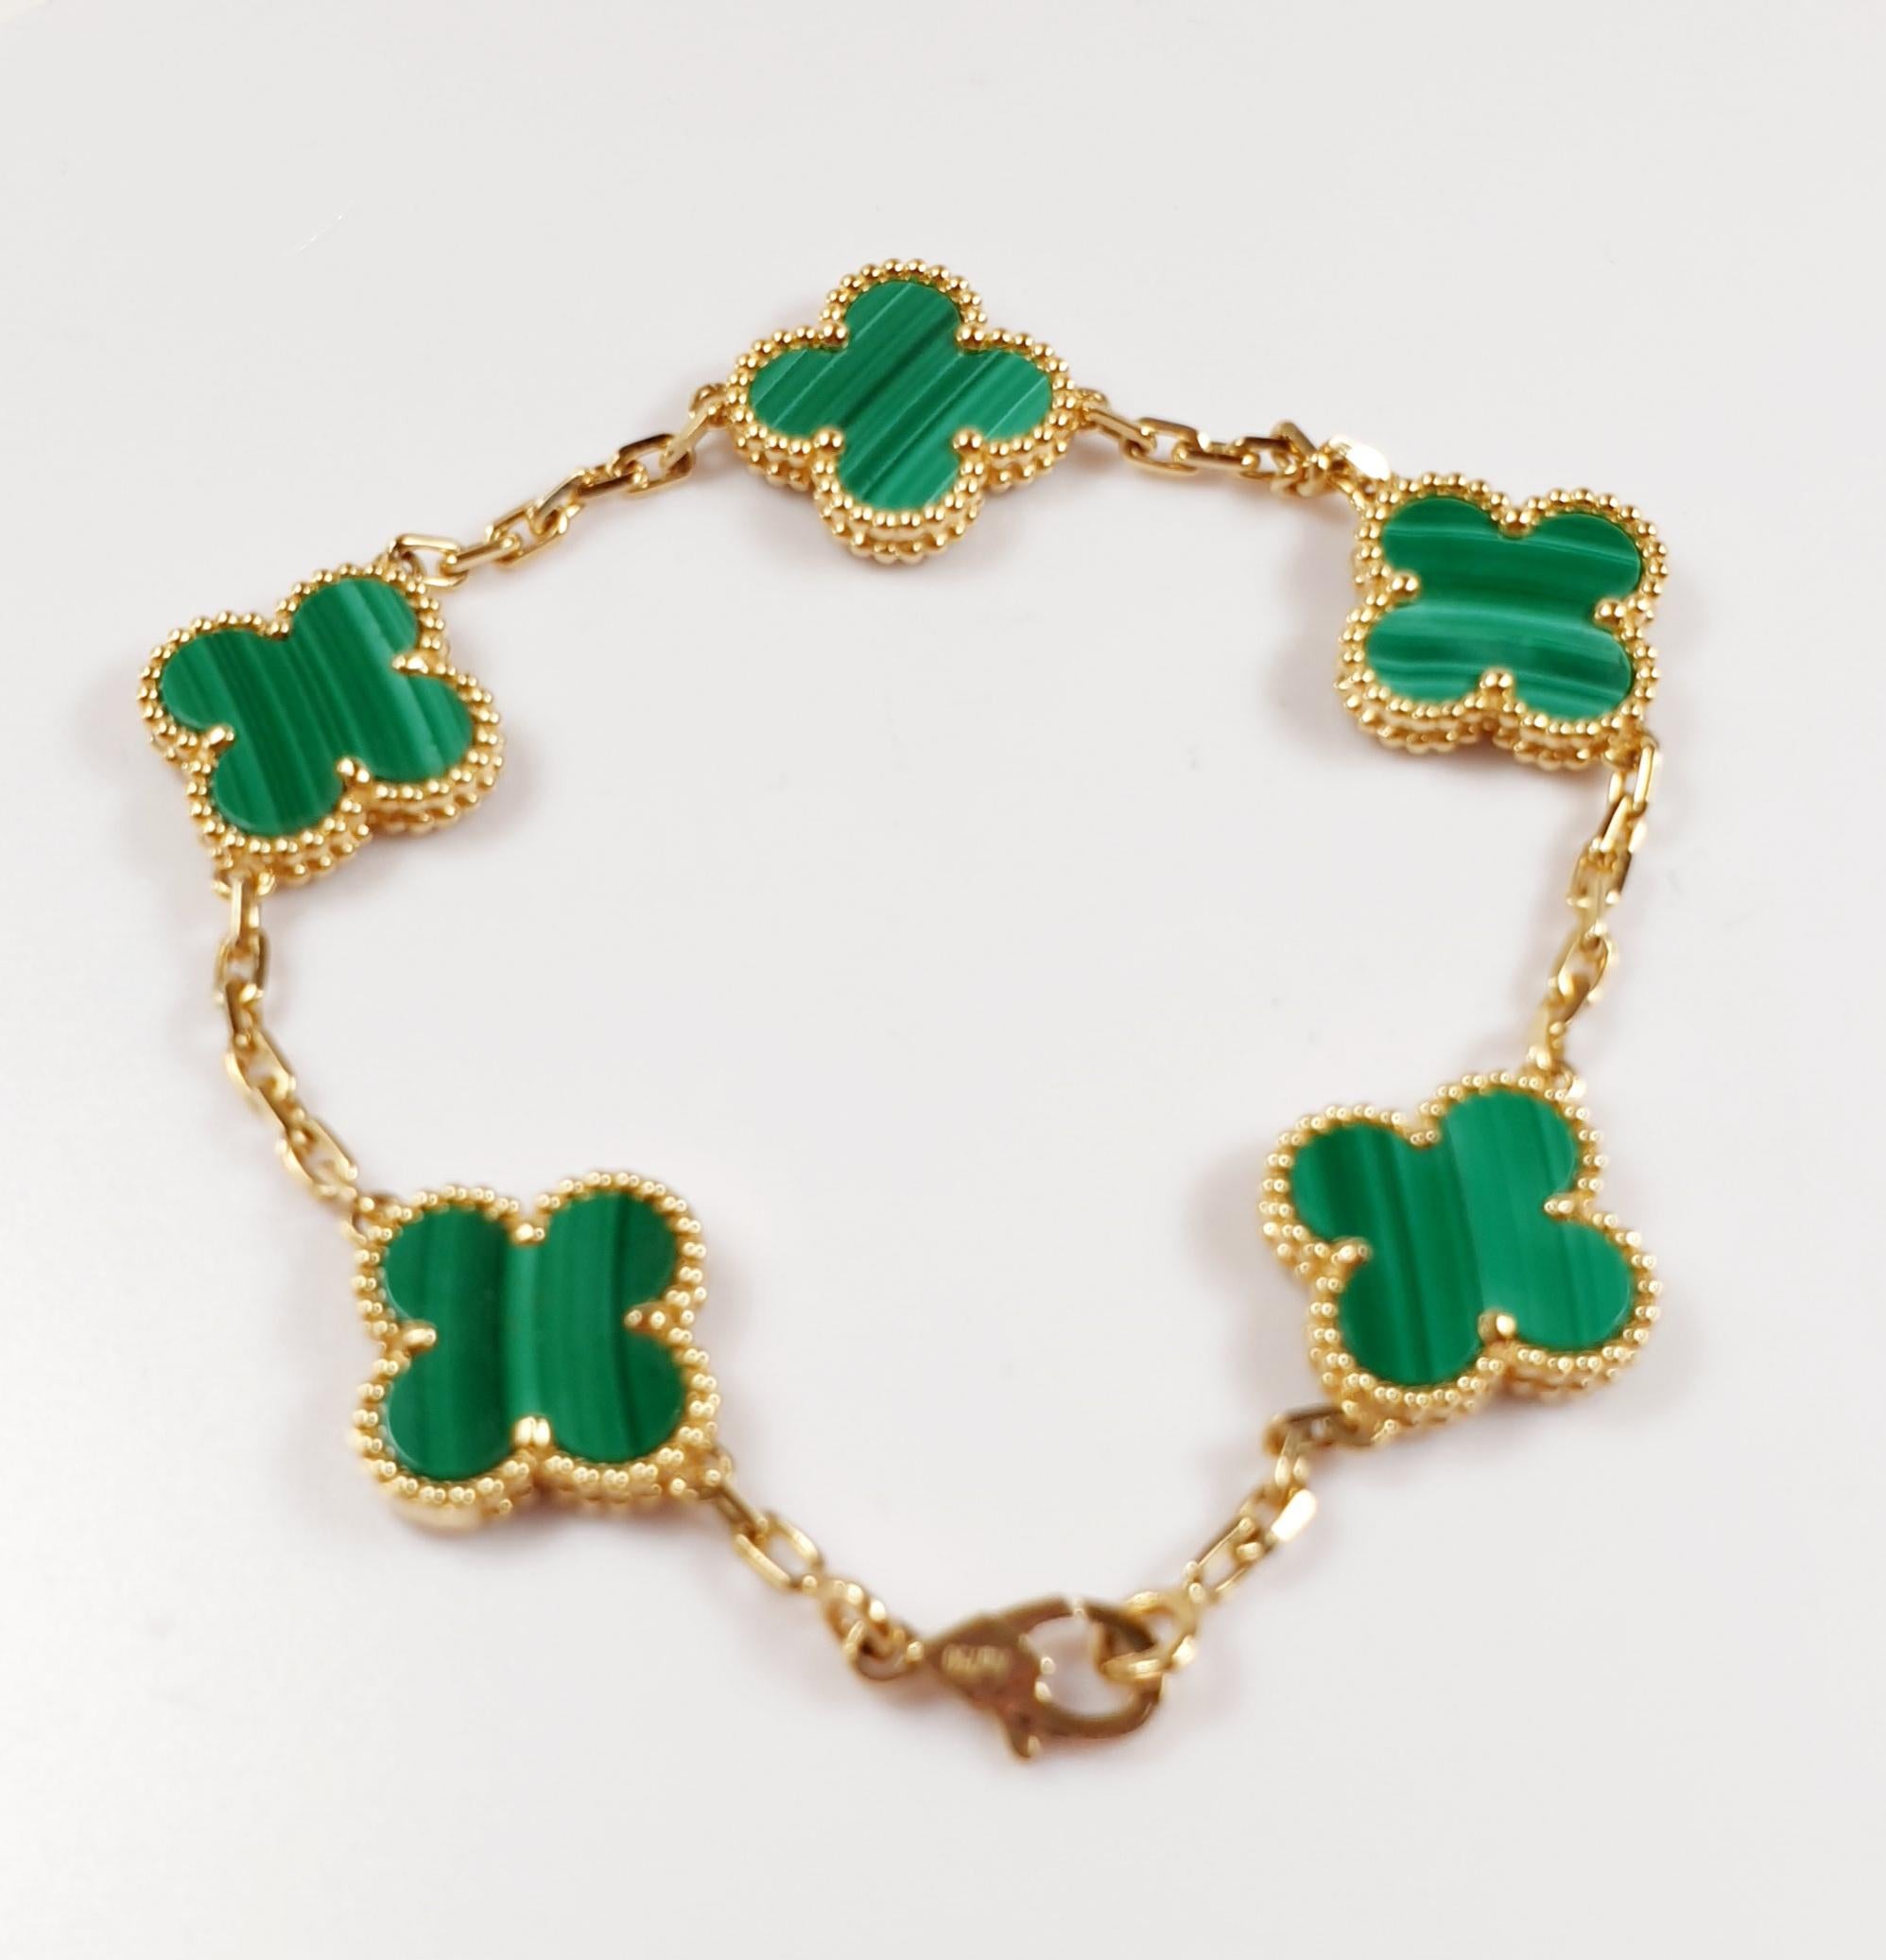 Van Cleef & Arpels Vintage Alhambra Bracelet 5 Motifs Malachite 18K Yellow Gold
This Vintage Alhambra 5 Motifs Malachite Bracelet is made of solid 18K Yellow Gold. This piece is handmade and manufactured by Imperial Time UK Ltd
(15mm diameter